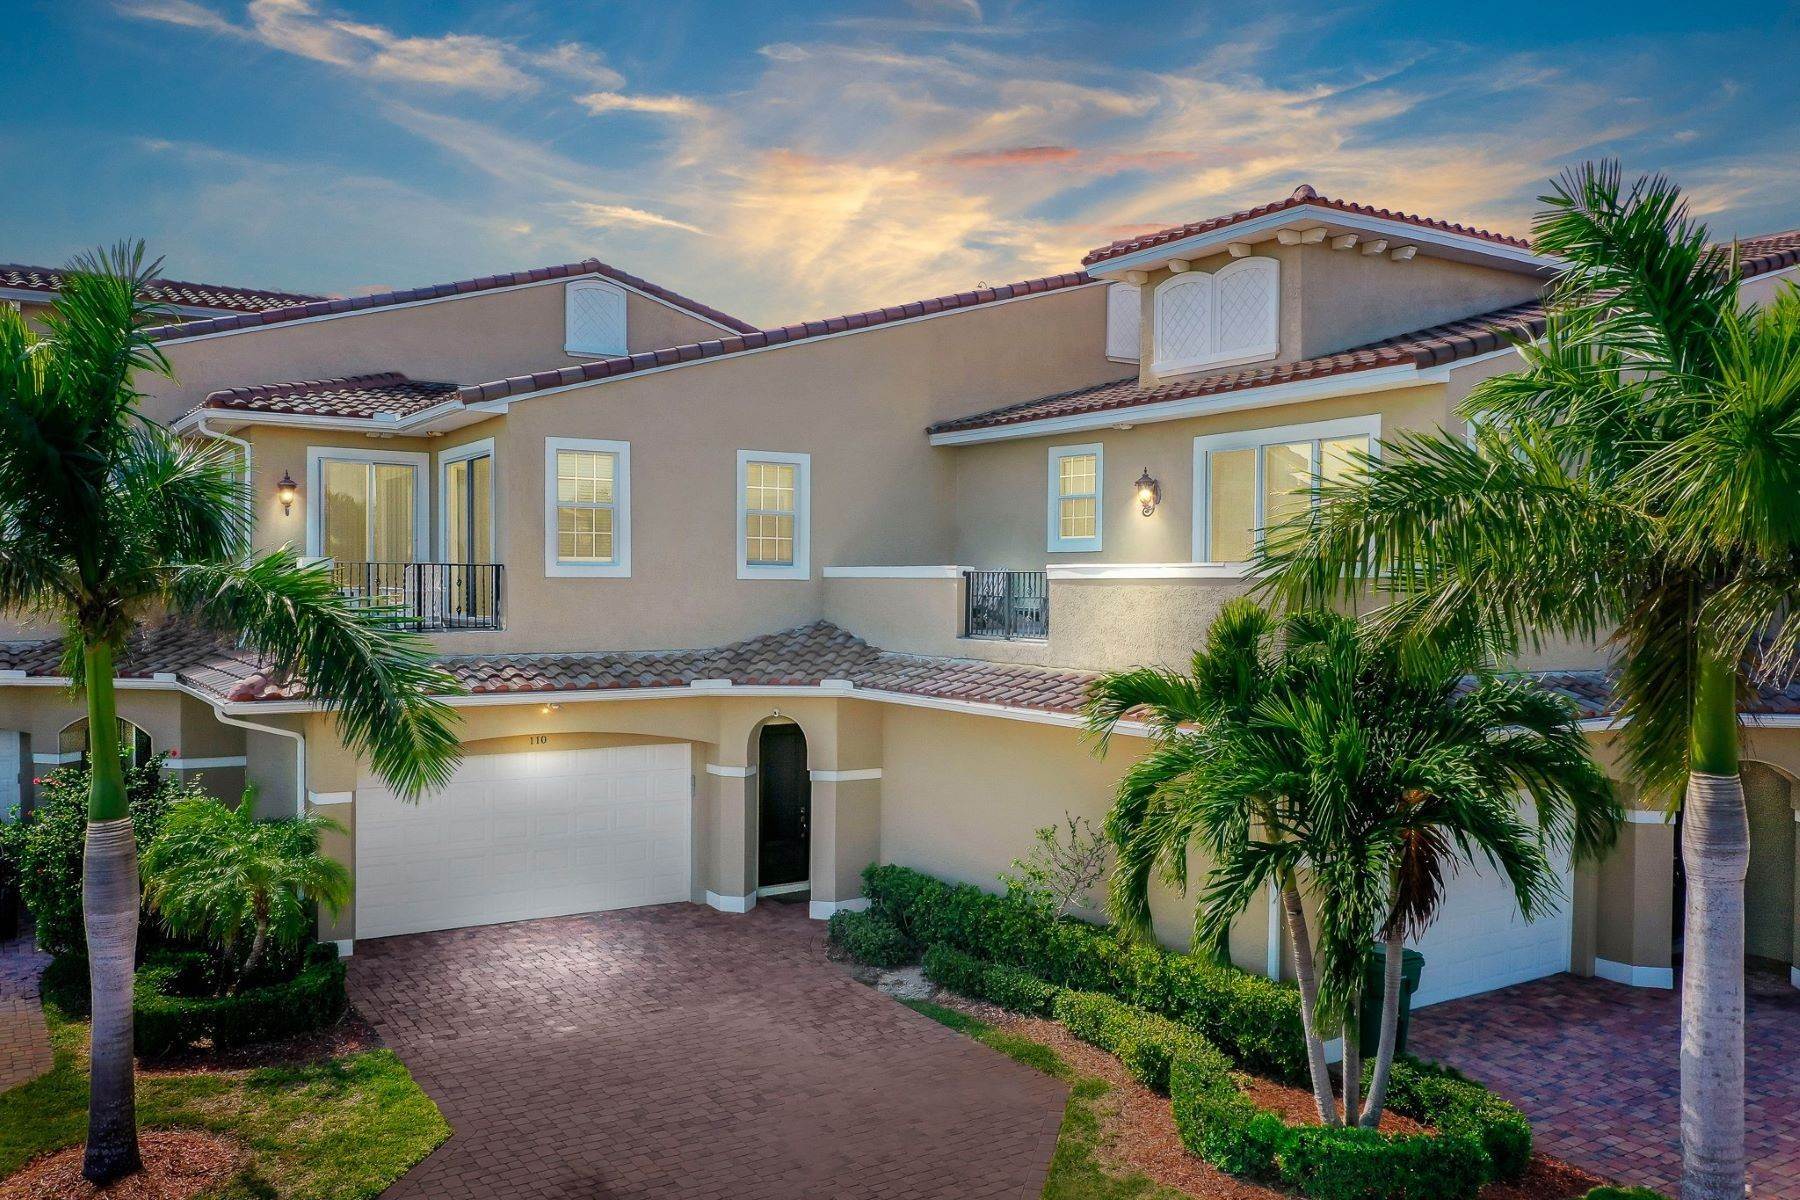 Townhouse for Sale at 110 Mediterranean Way, Indian Harbour Beach, FL 110 Mediterranean Way Indian Harbour Beach, Florida 32937 United States